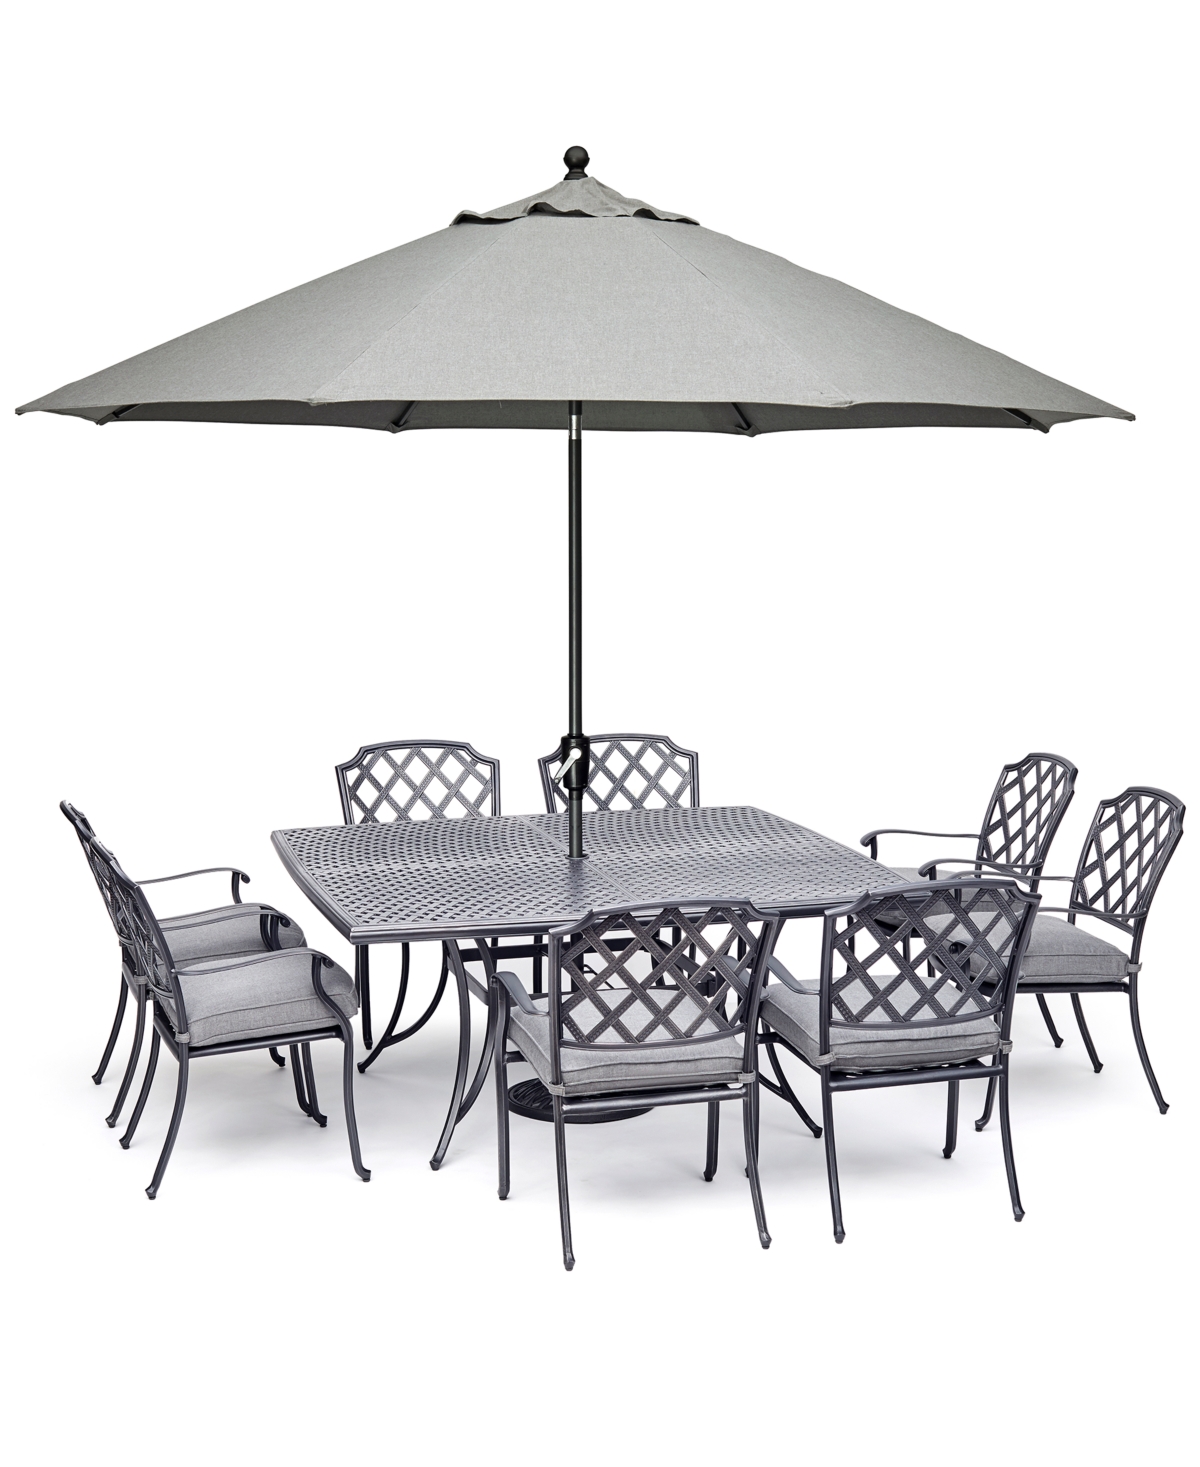 Vintage Ii Outdoor Cast Aluminum 9-Pc. Dining Set (64 X 64 Table & 8 Dining Chairs) With Sunbrella Cushions, Created for Macys